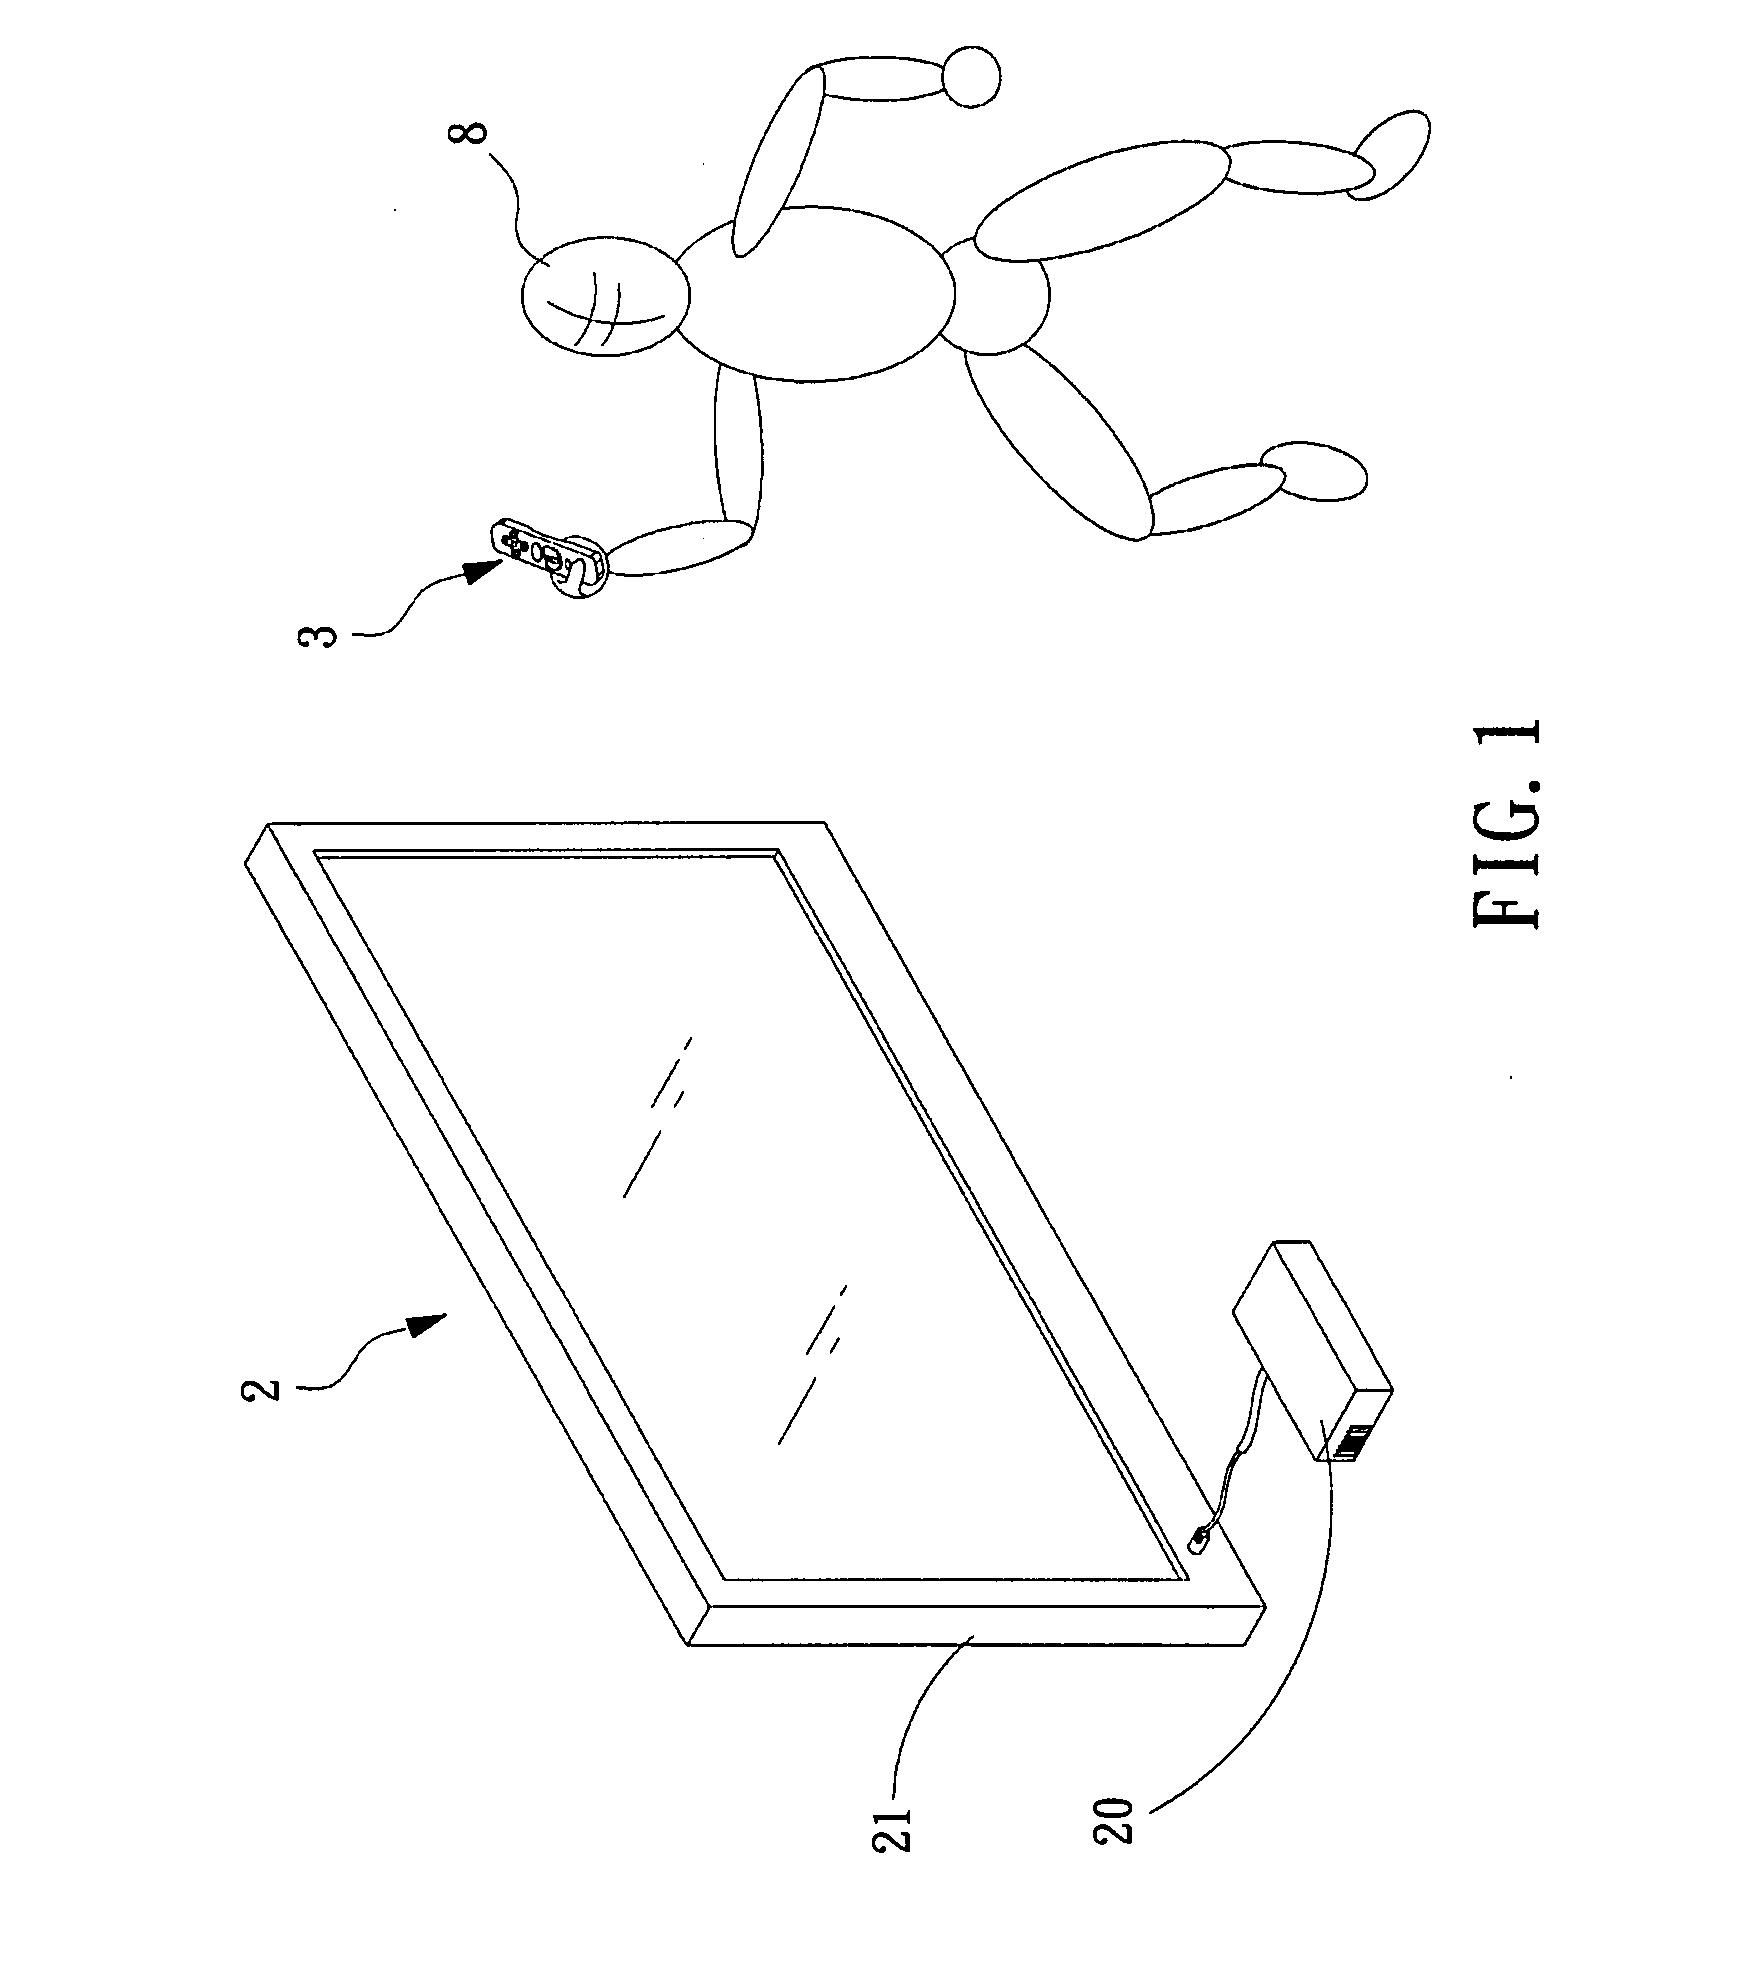 Interactive pointing device